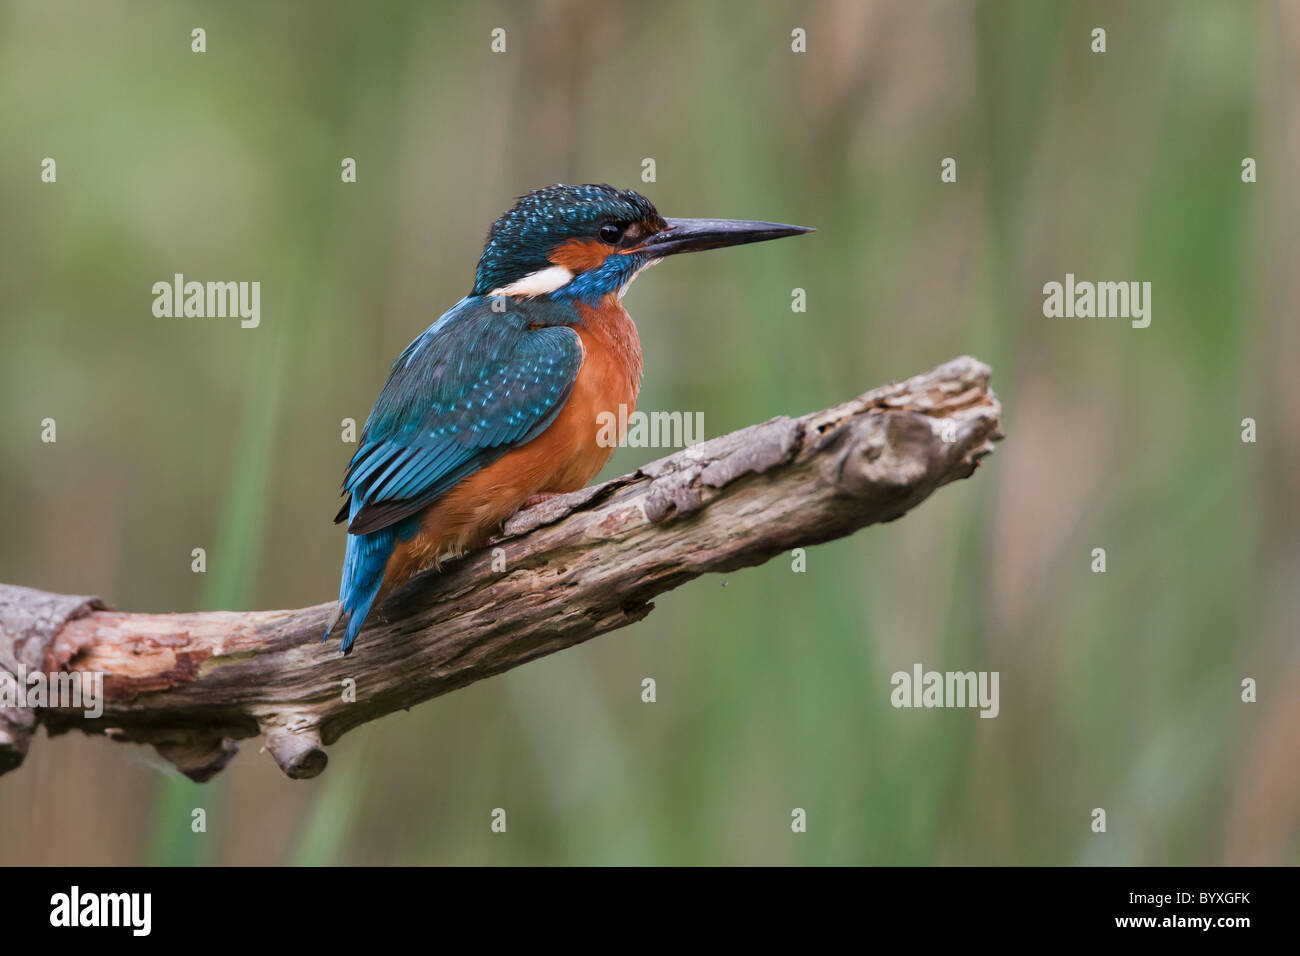 Kingfisher on a perch Stock Photo